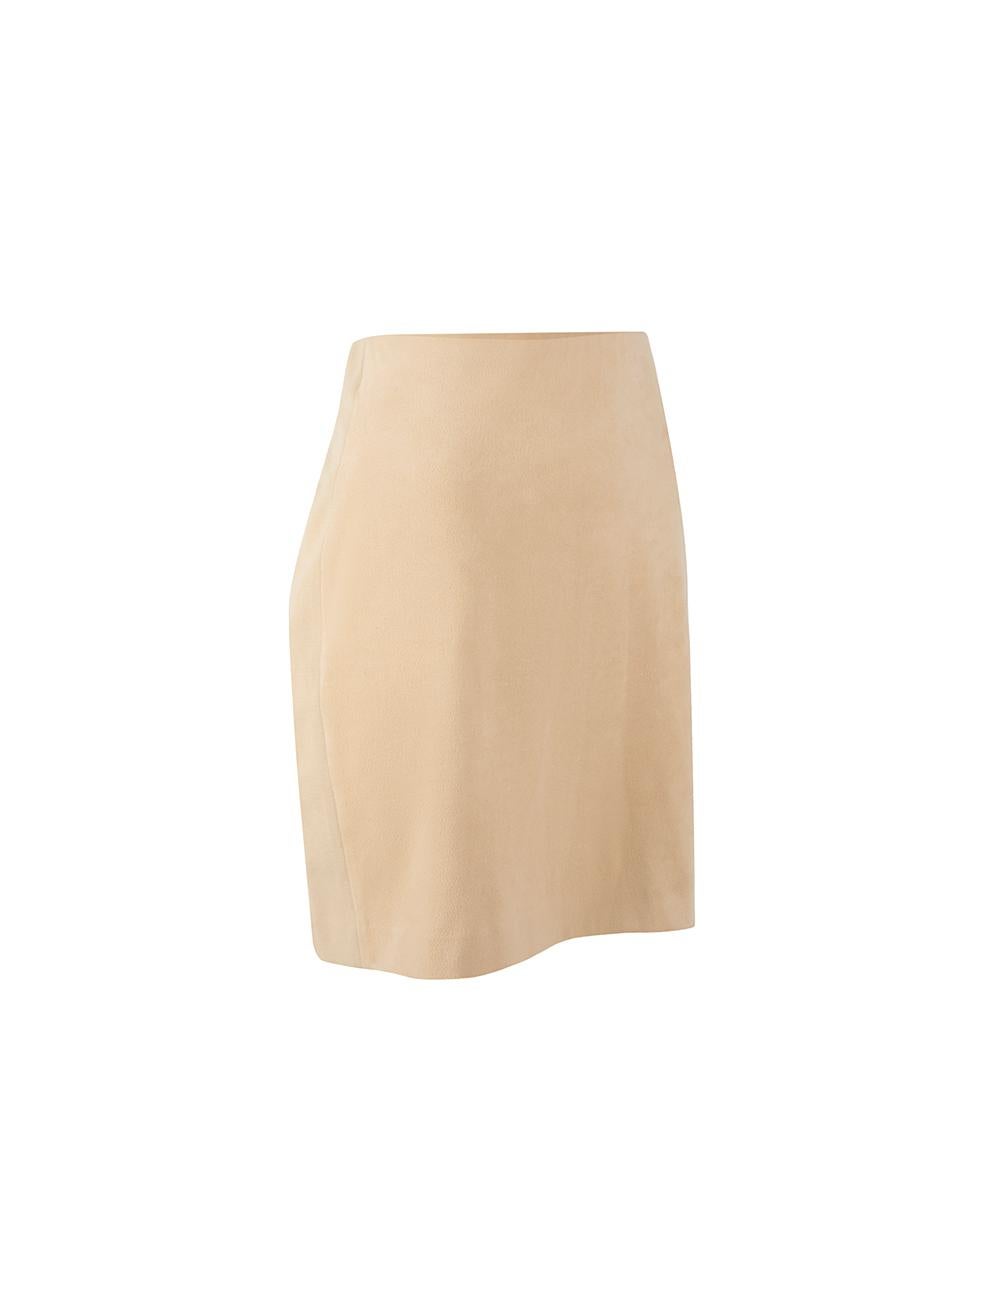 CONDITION is Very good. Minimal wear to skirt is evident. Minimal wear to the rear with small mark on this used Wolford designer resale item. 



Details


Beige

Faux suede- polyester

Mini fitted skirt

Elasticated waistband





Made in